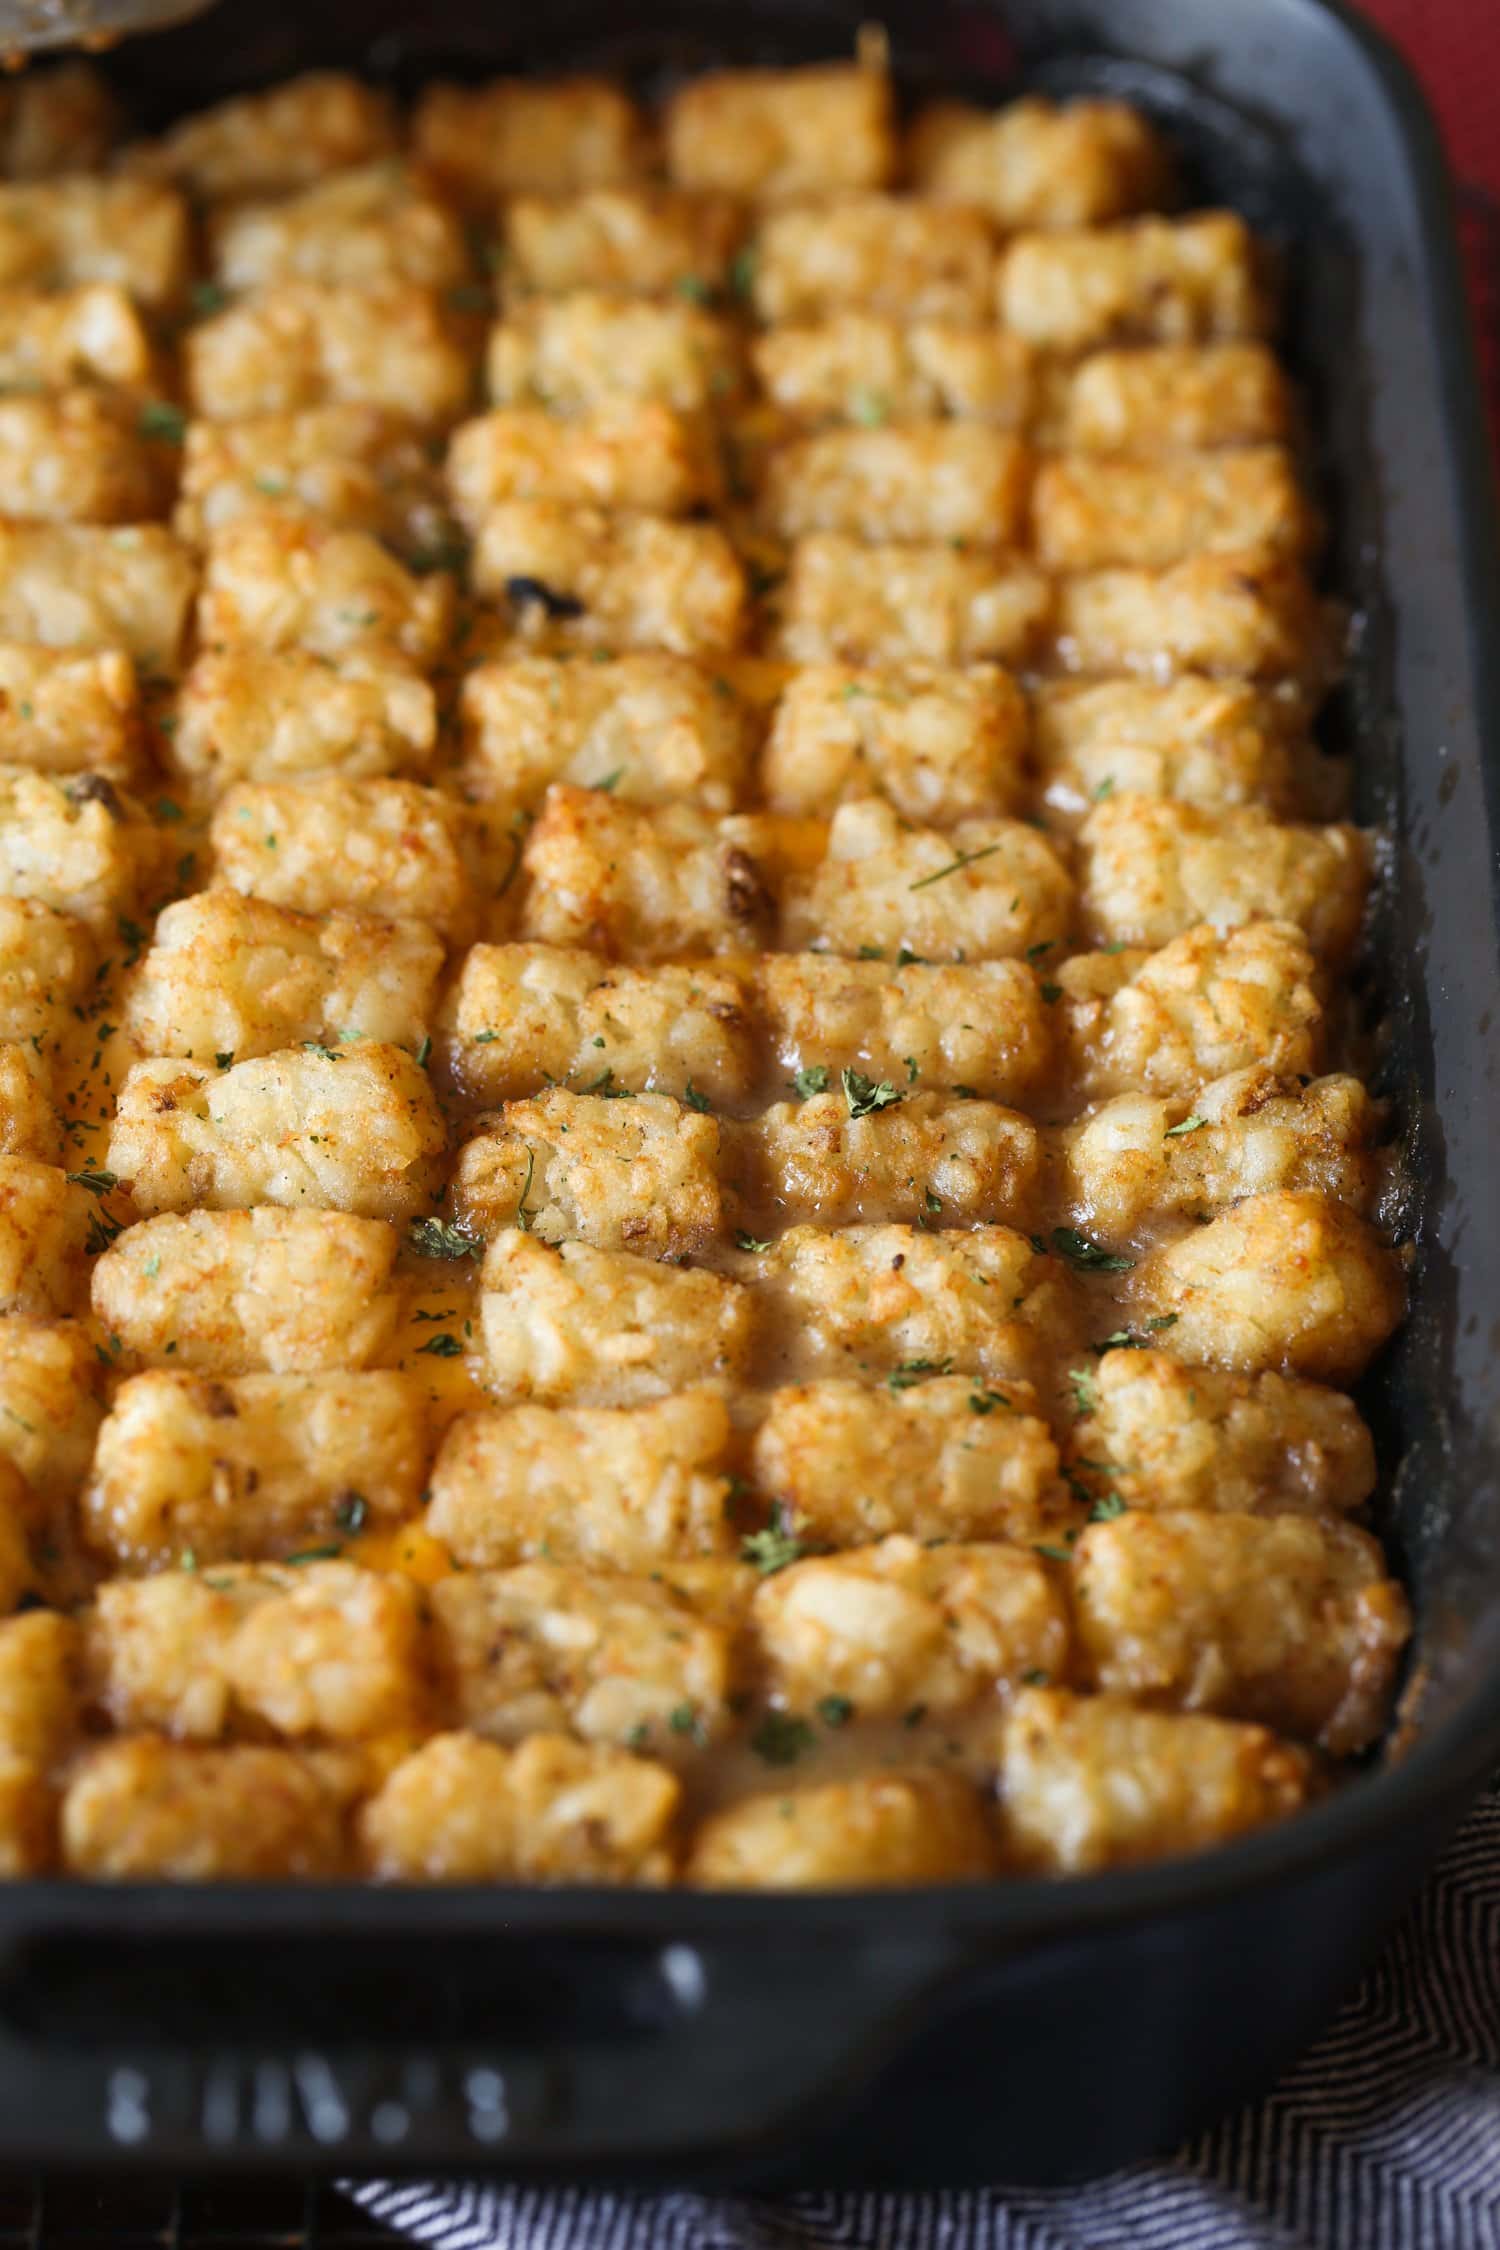 Baked tater tot casserole in a 9x13 pan.